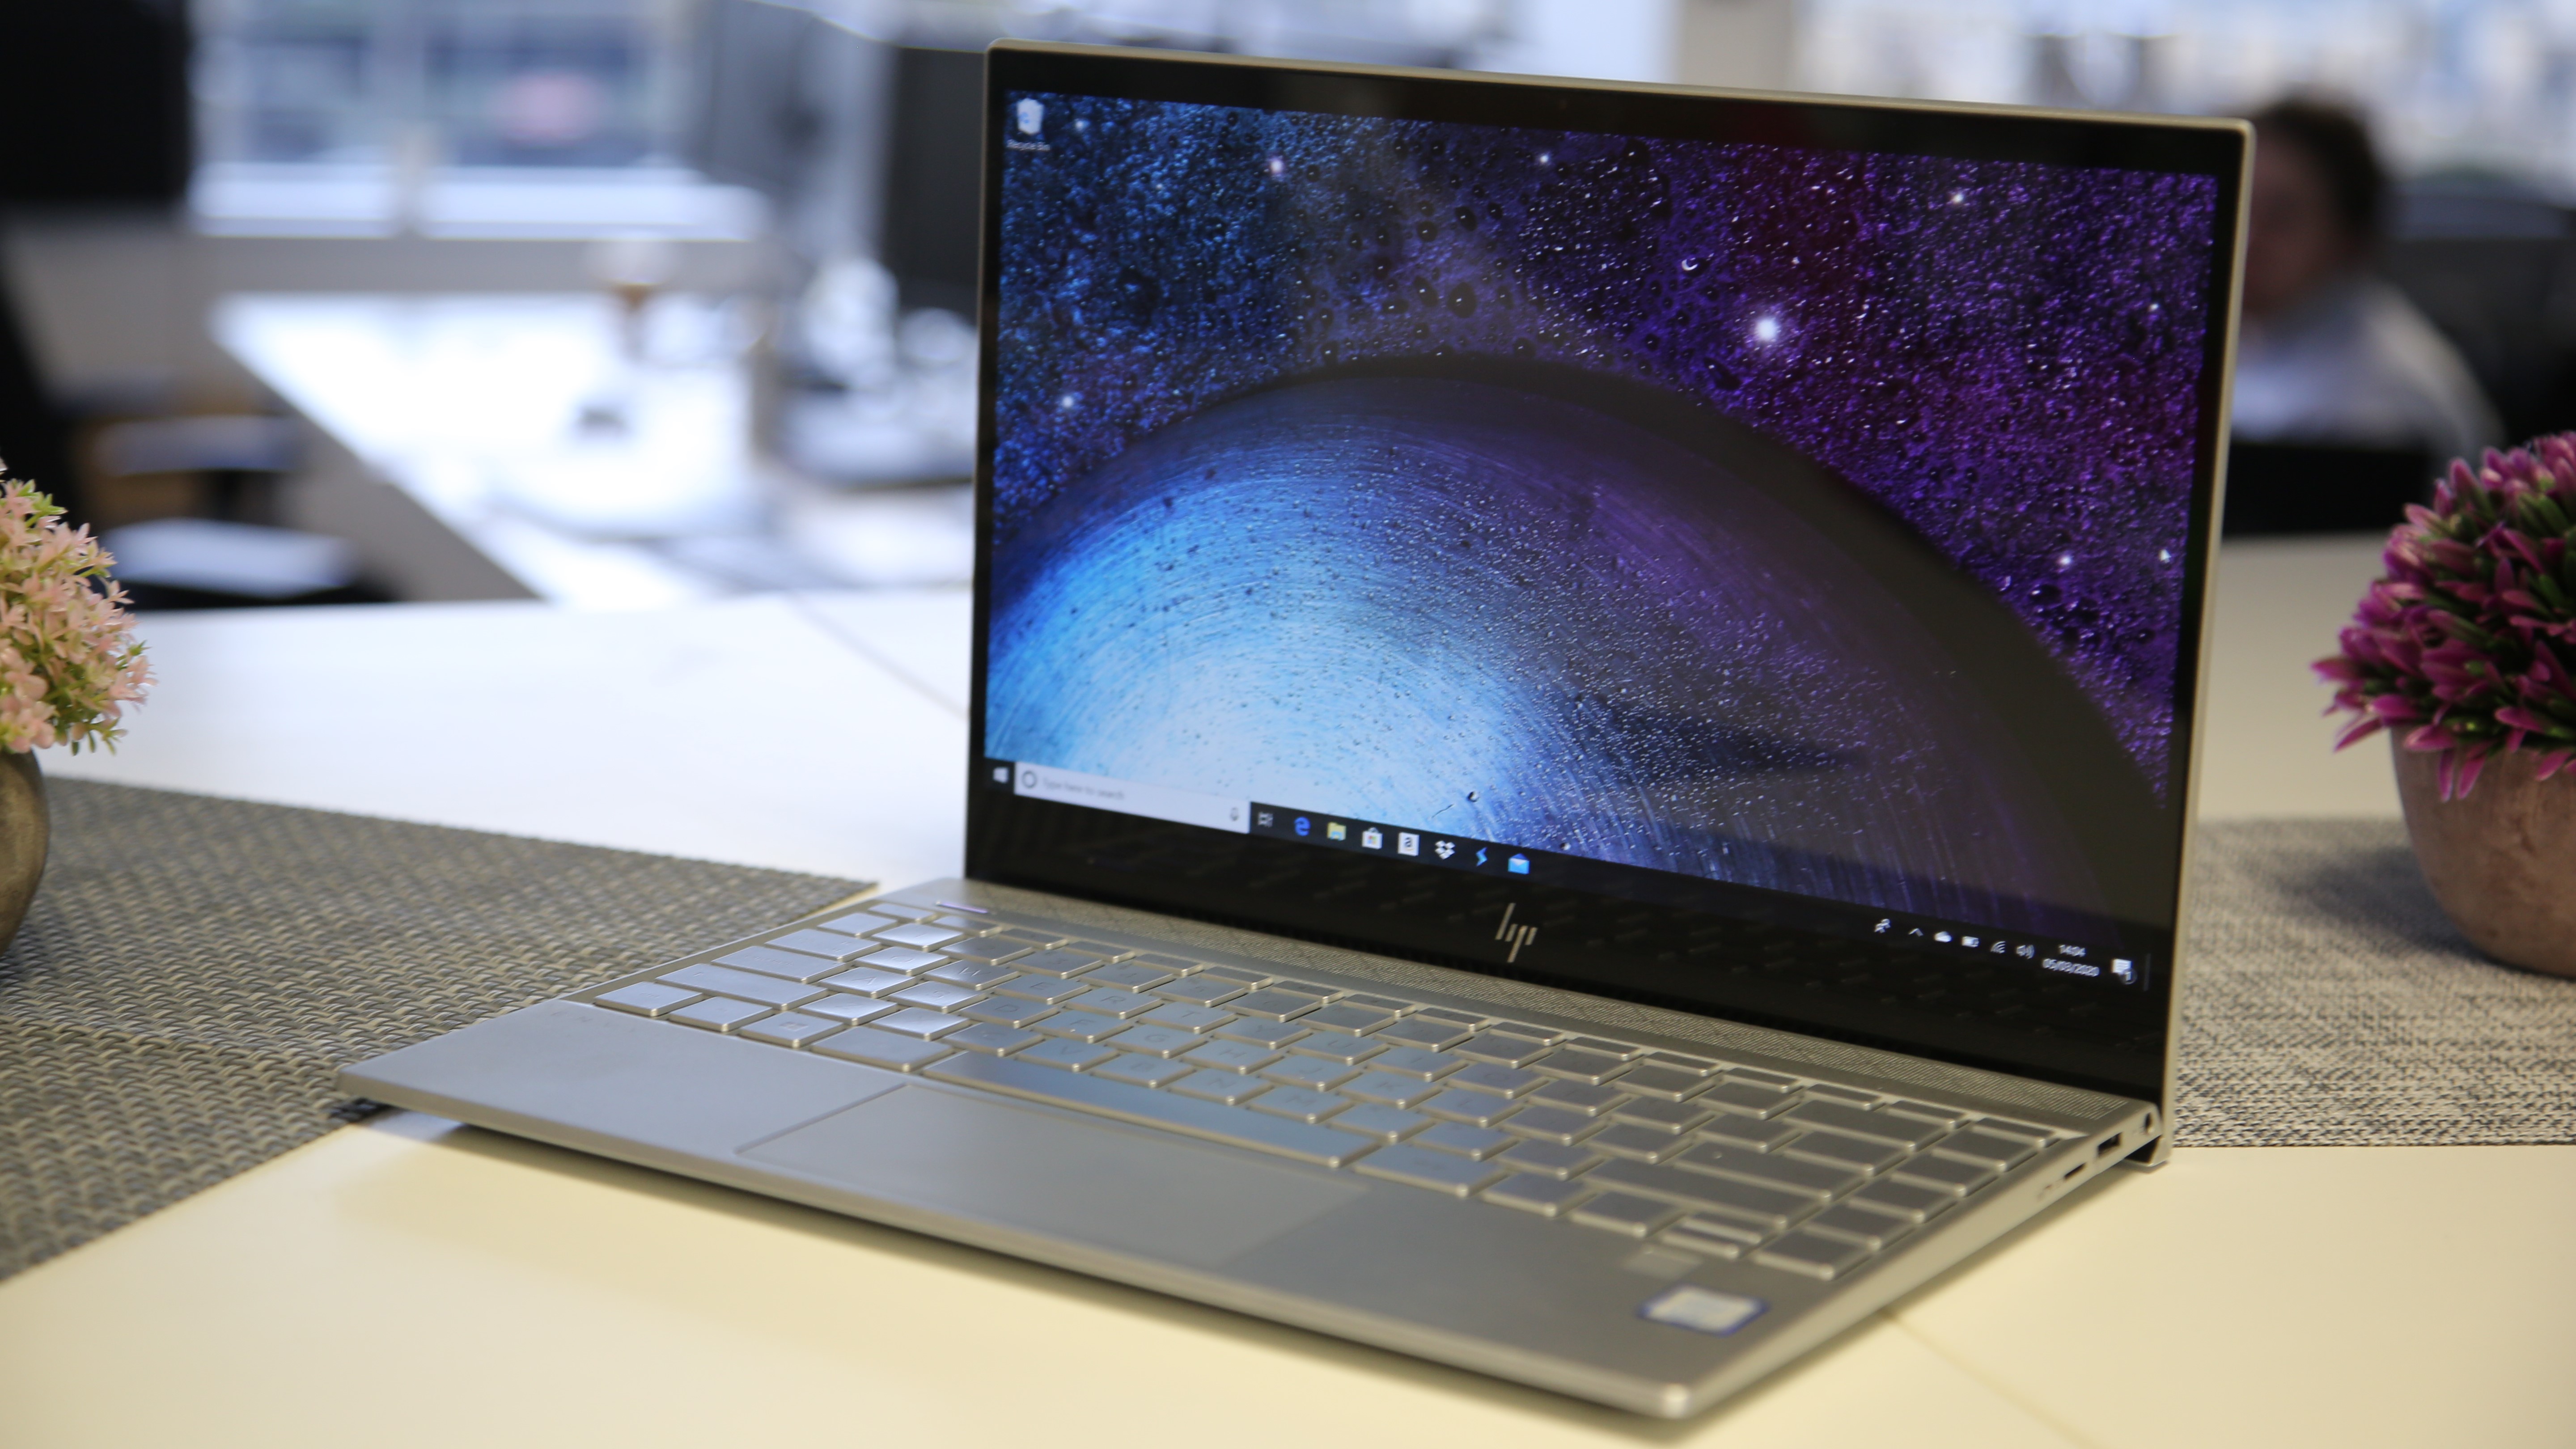 HP Envy 13 review: A slim, light, and inexpensive workhorse with